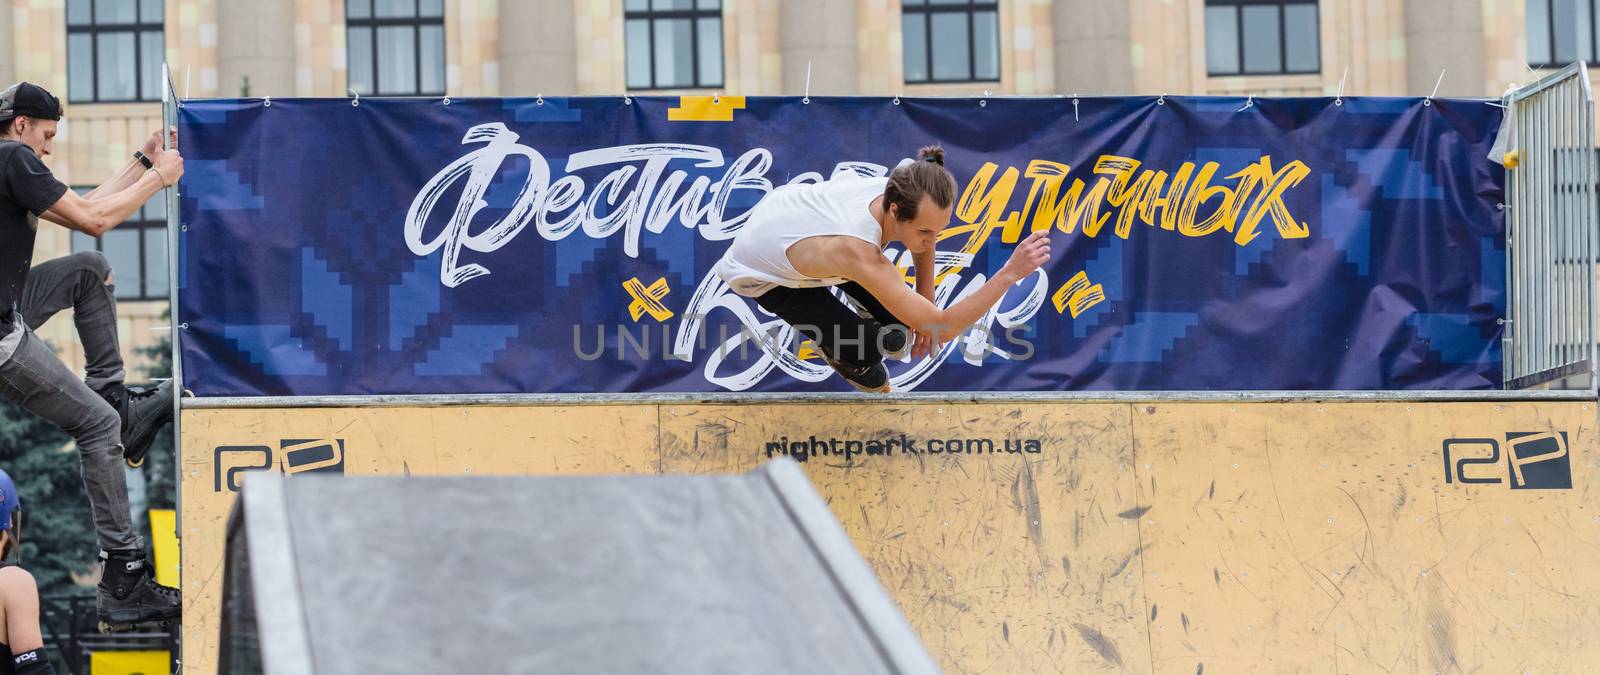 Aggressive rollerblading competition,festival of street culture by MegaArt